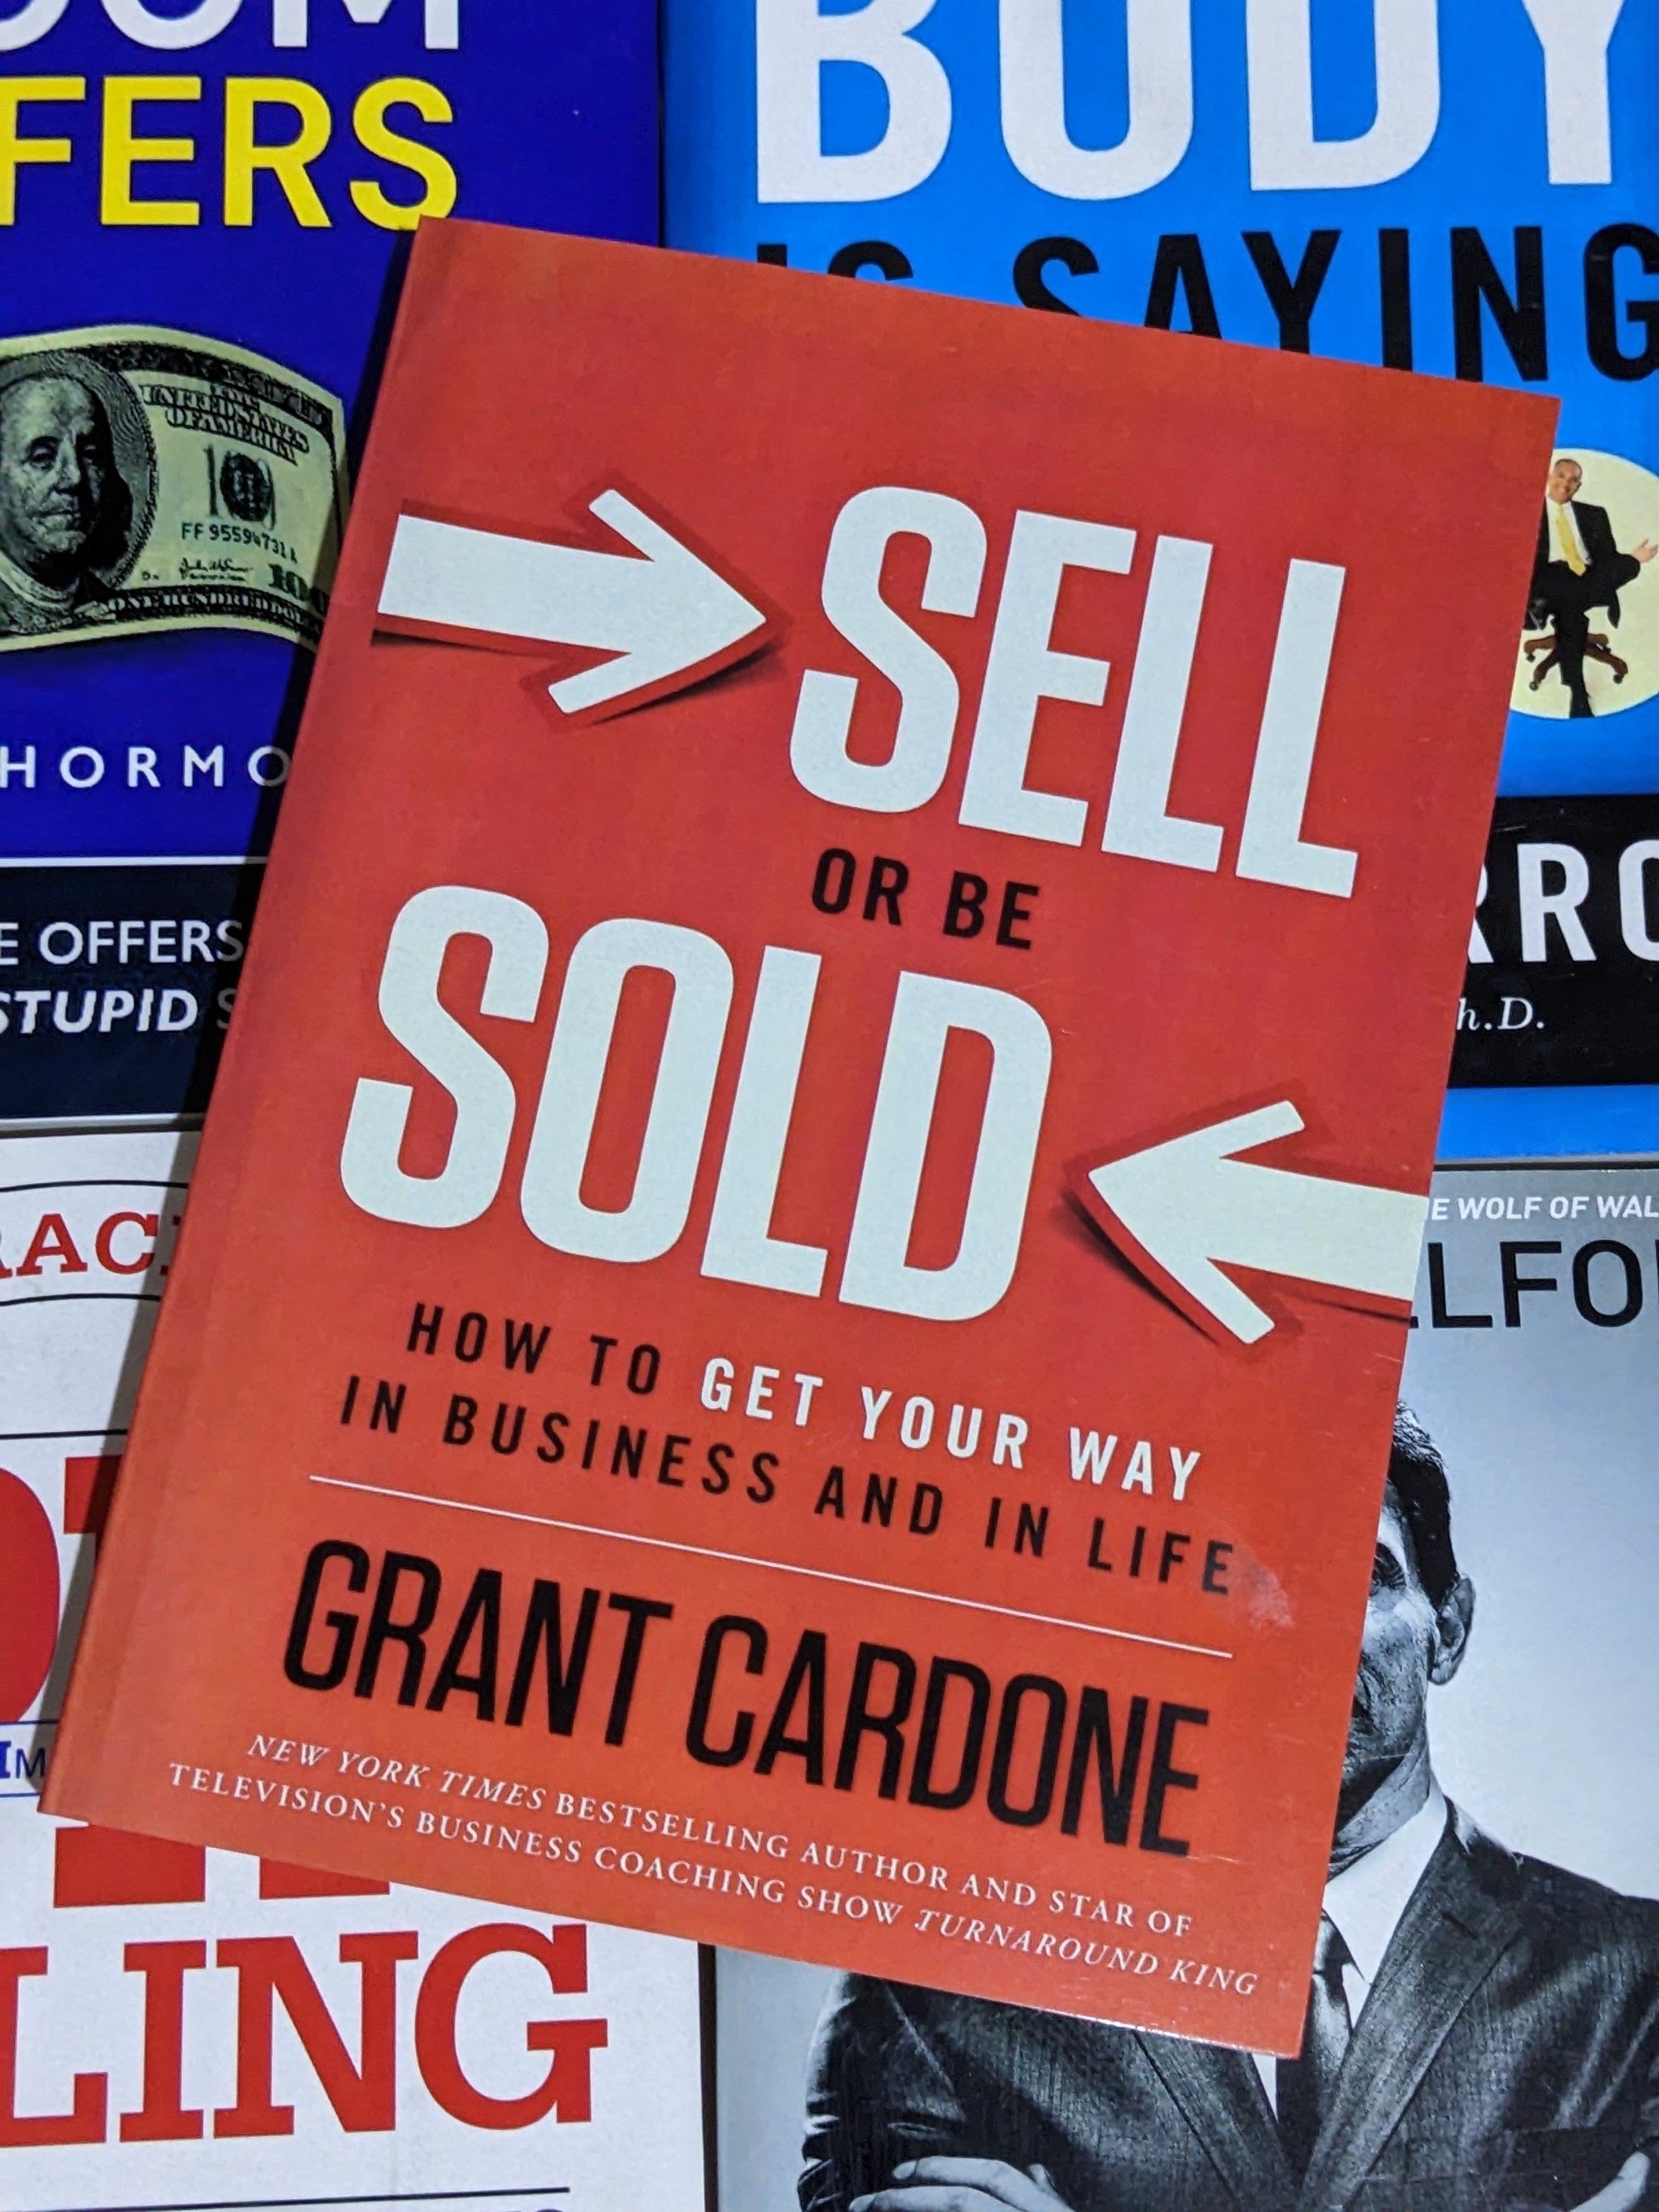 Sell or Be Sold by Grant Cardone